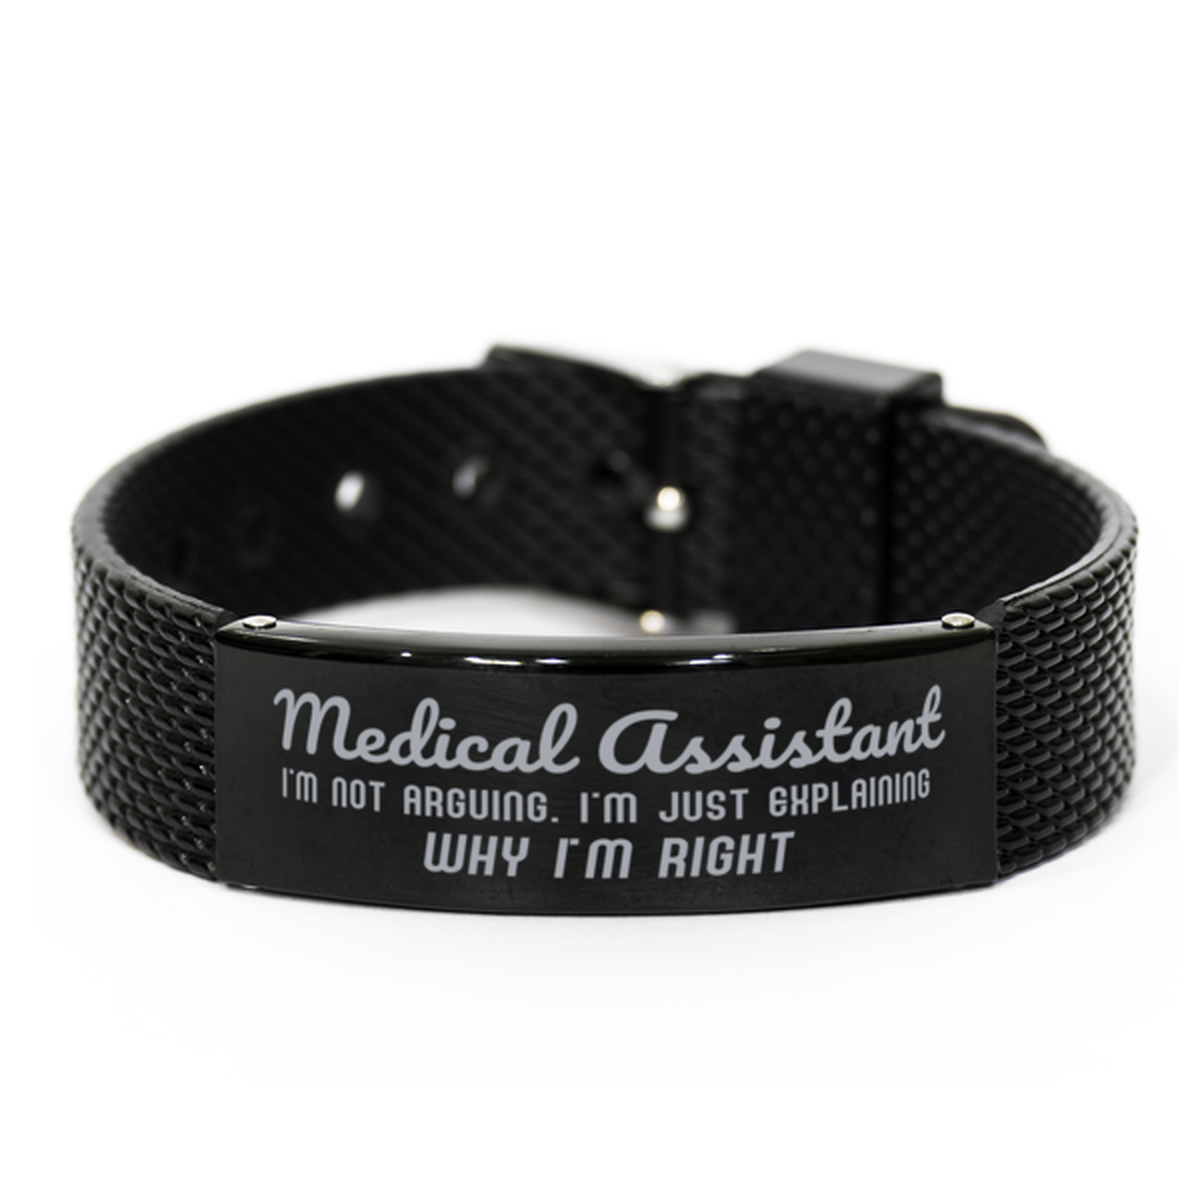 Medical Assistant I'm not Arguing. I'm Just Explaining Why I'm RIGHT Black Shark Mesh Bracelet, Funny Saying Quote Medical Assistant Gifts For Medical Assistant Graduation Birthday Christmas Gifts for Men Women Coworker